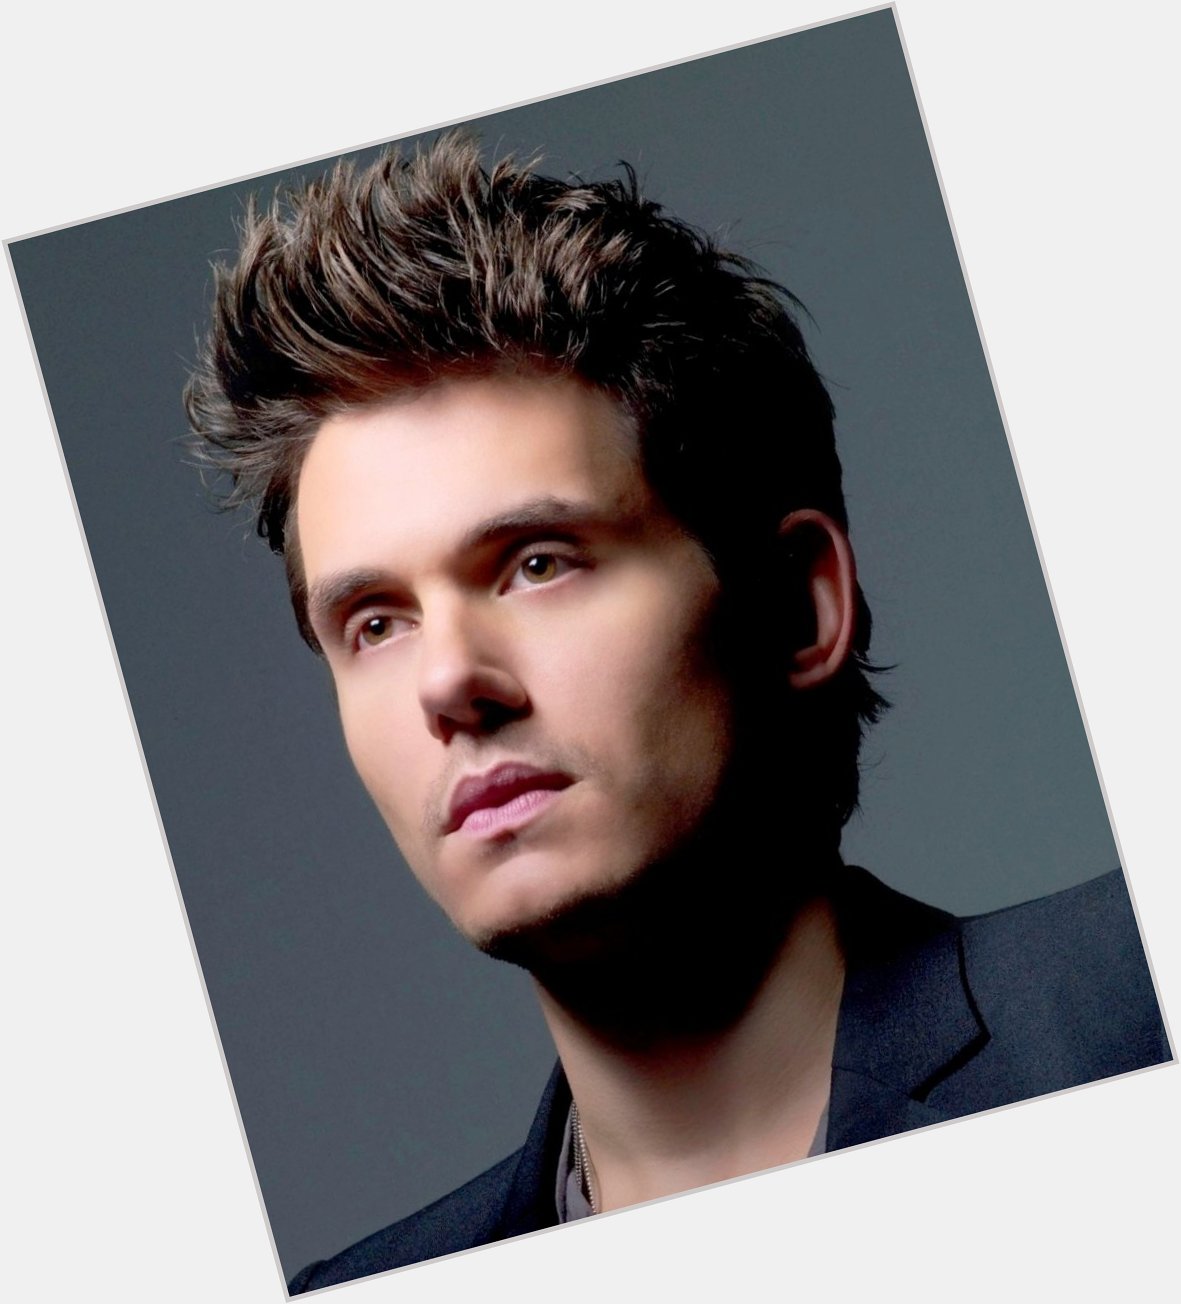 John Mayer October 16 Sending Very Happy Birthday Wishes! Continued Success! 